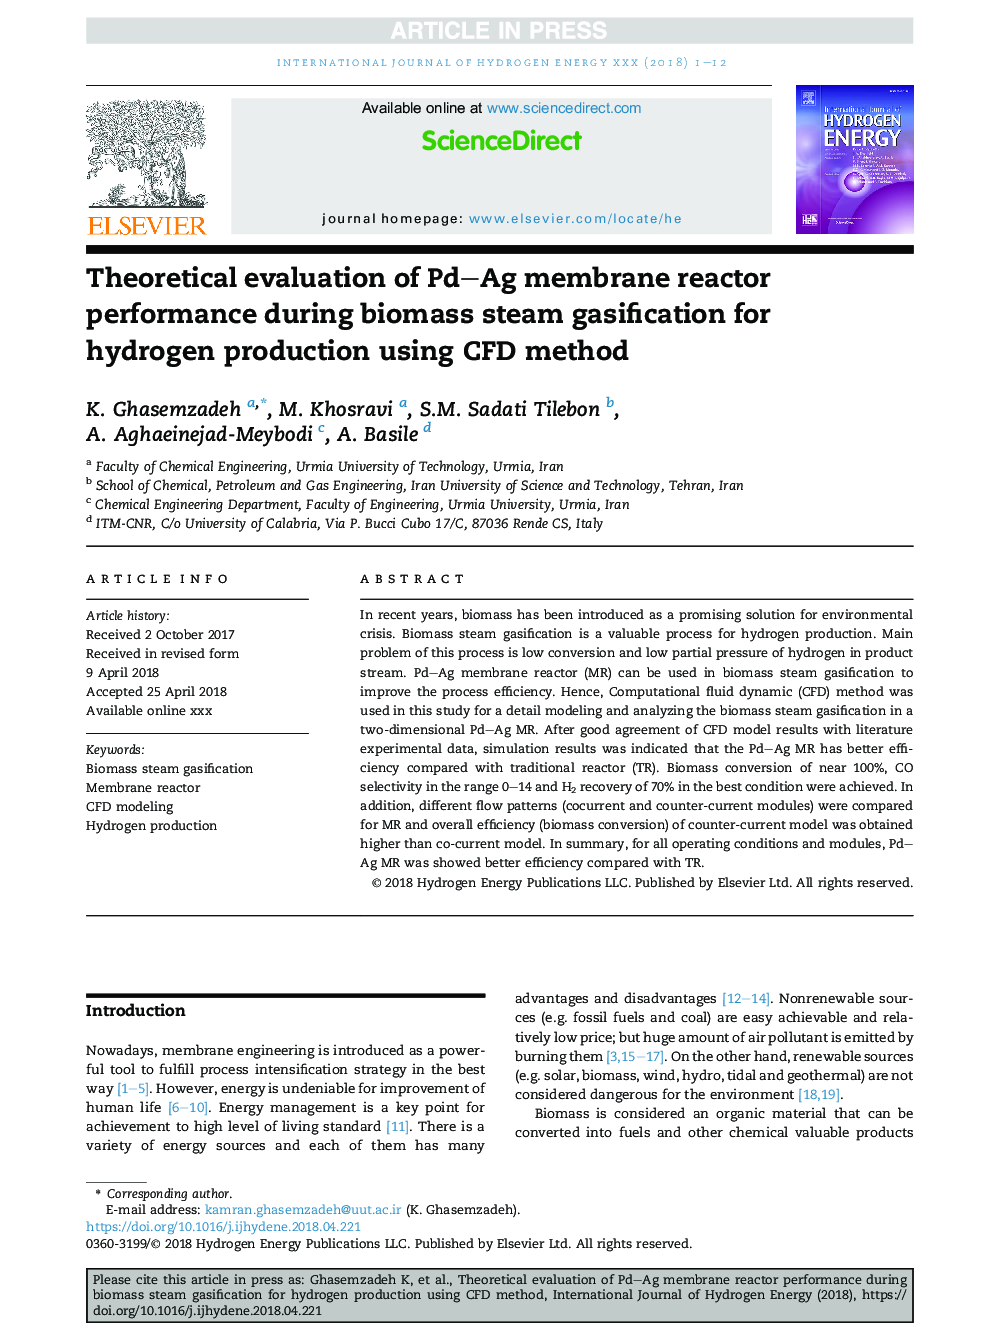 Theoretical evaluation of PdAg membrane reactor performance during biomass steam gasification for hydrogen production using CFD method